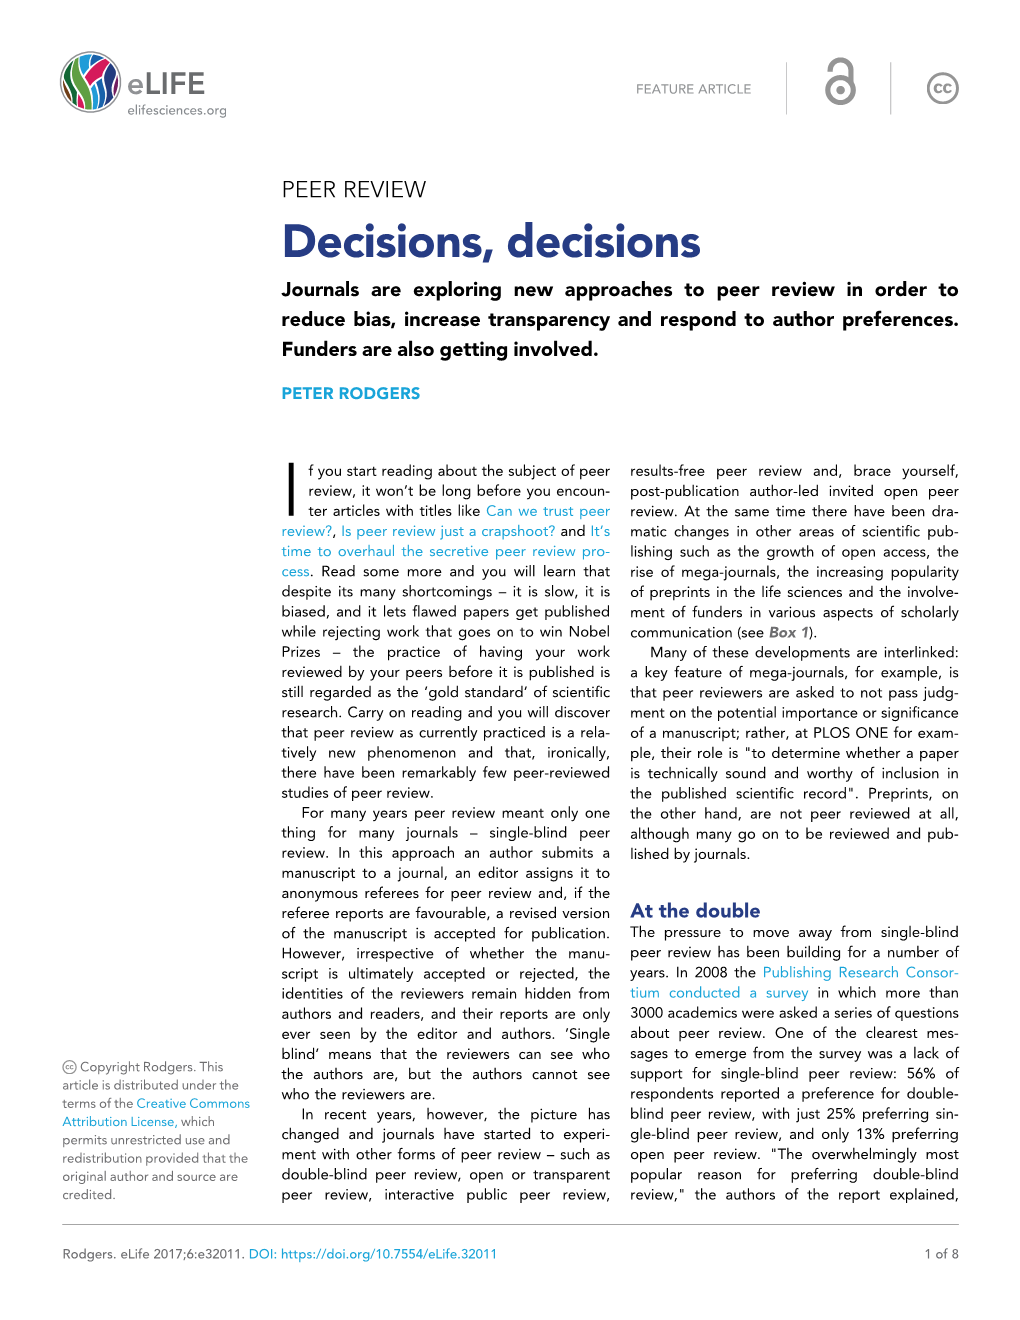 Decisions, Decisions Journals Are Exploring New Approaches to Peer Review in Order to Reduce Bias, Increase Transparency and Respond to Author Preferences